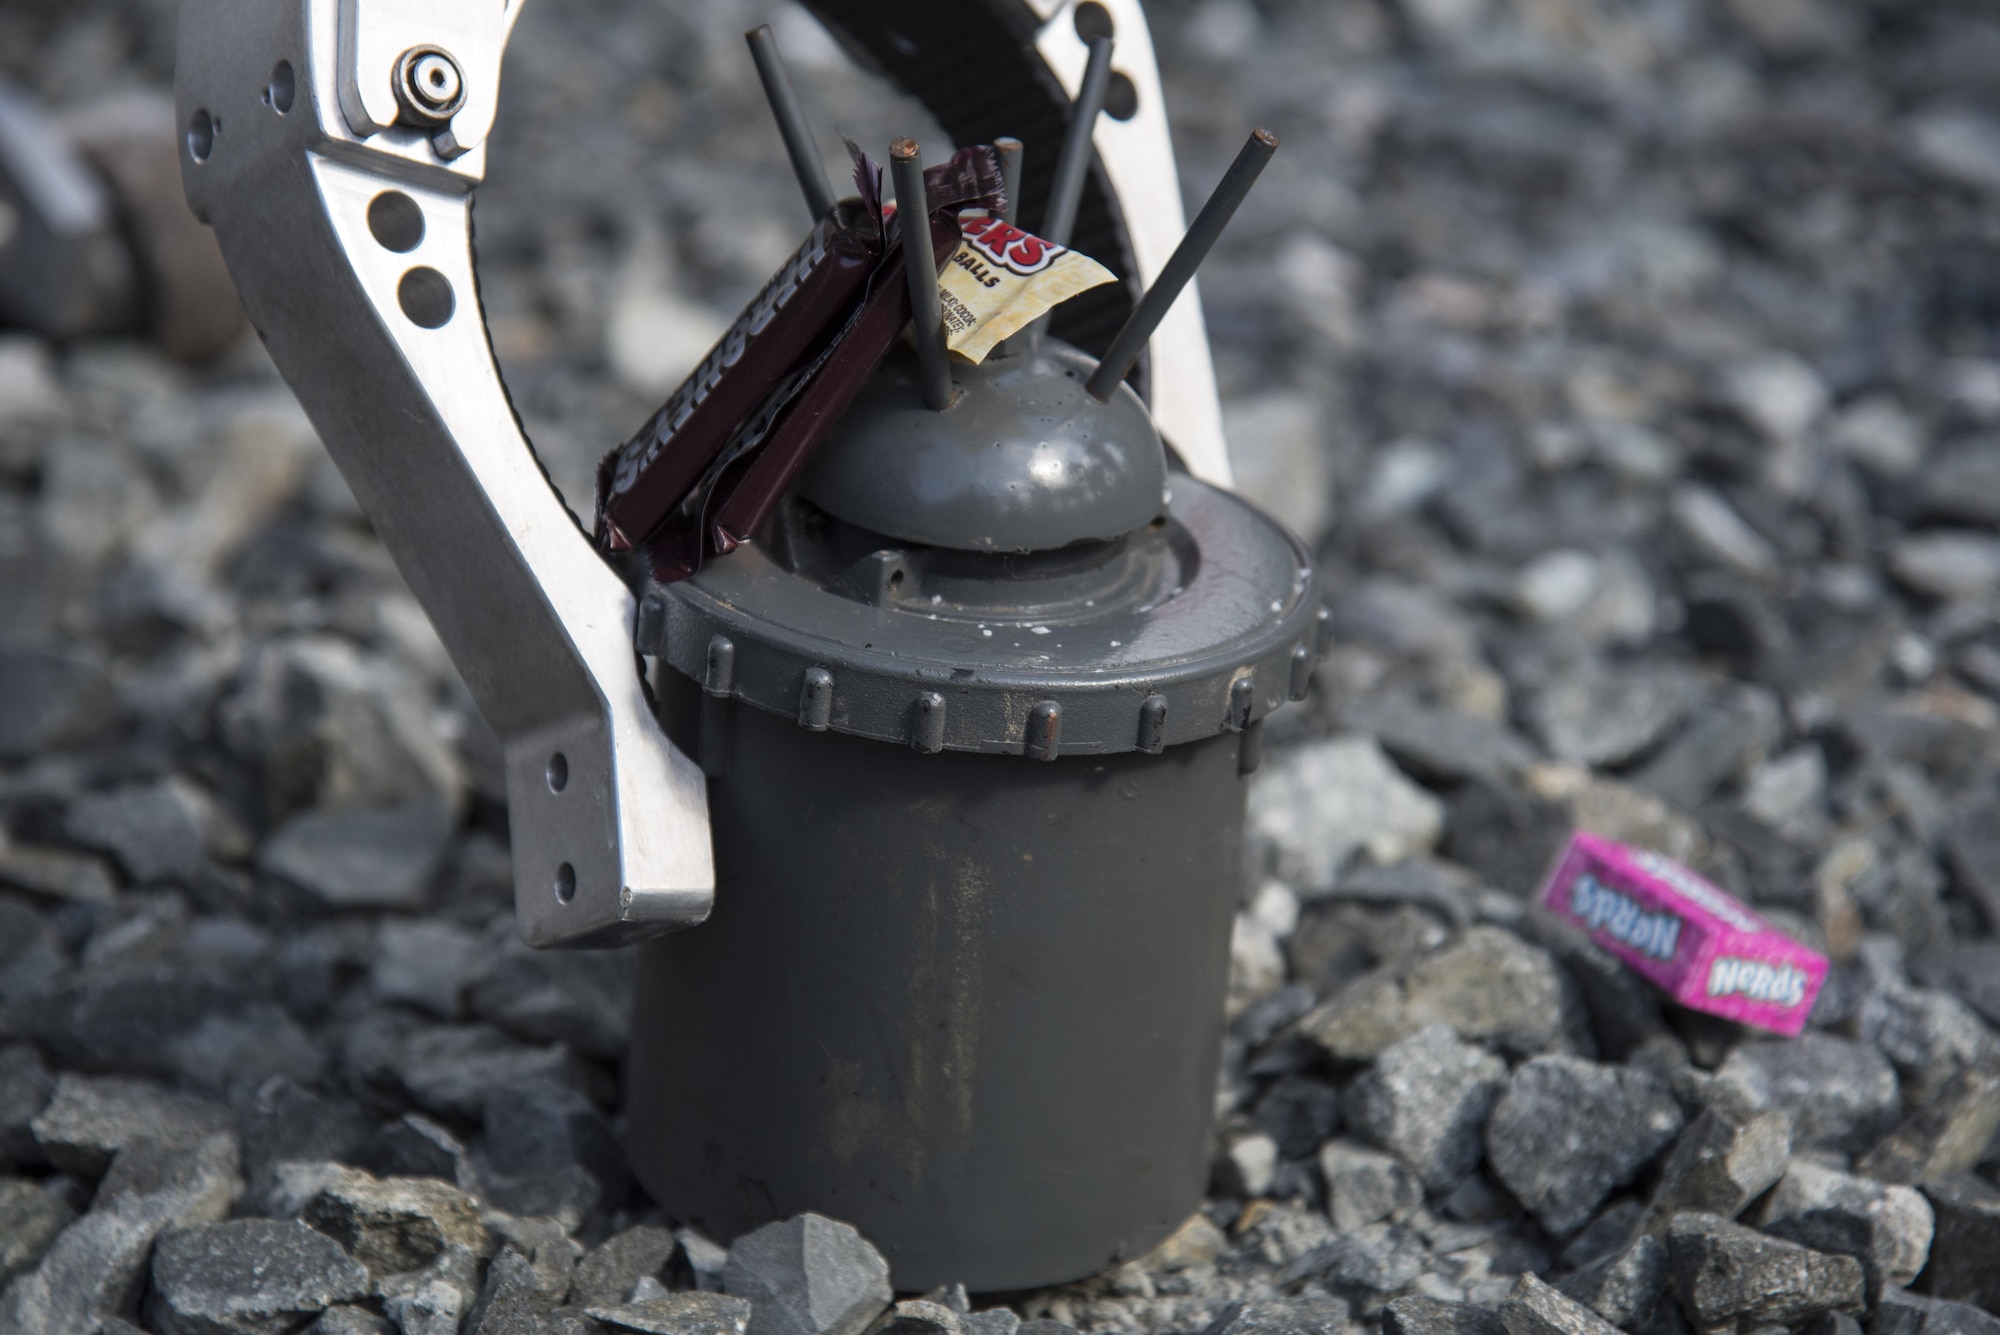 A landmine, also known as a 'bouncing betty,' sits with candy during a Range Day event at Misawa Air Base, Japan, Oct. 21, 2016. When set off by a trip wire, a first charge ignites at the bottom of the explosive causing it to bounce into the air, then a second charge causes the device to detonate. (U.S. Air Force photo by Airman 1st Class Sadie Colbert)
